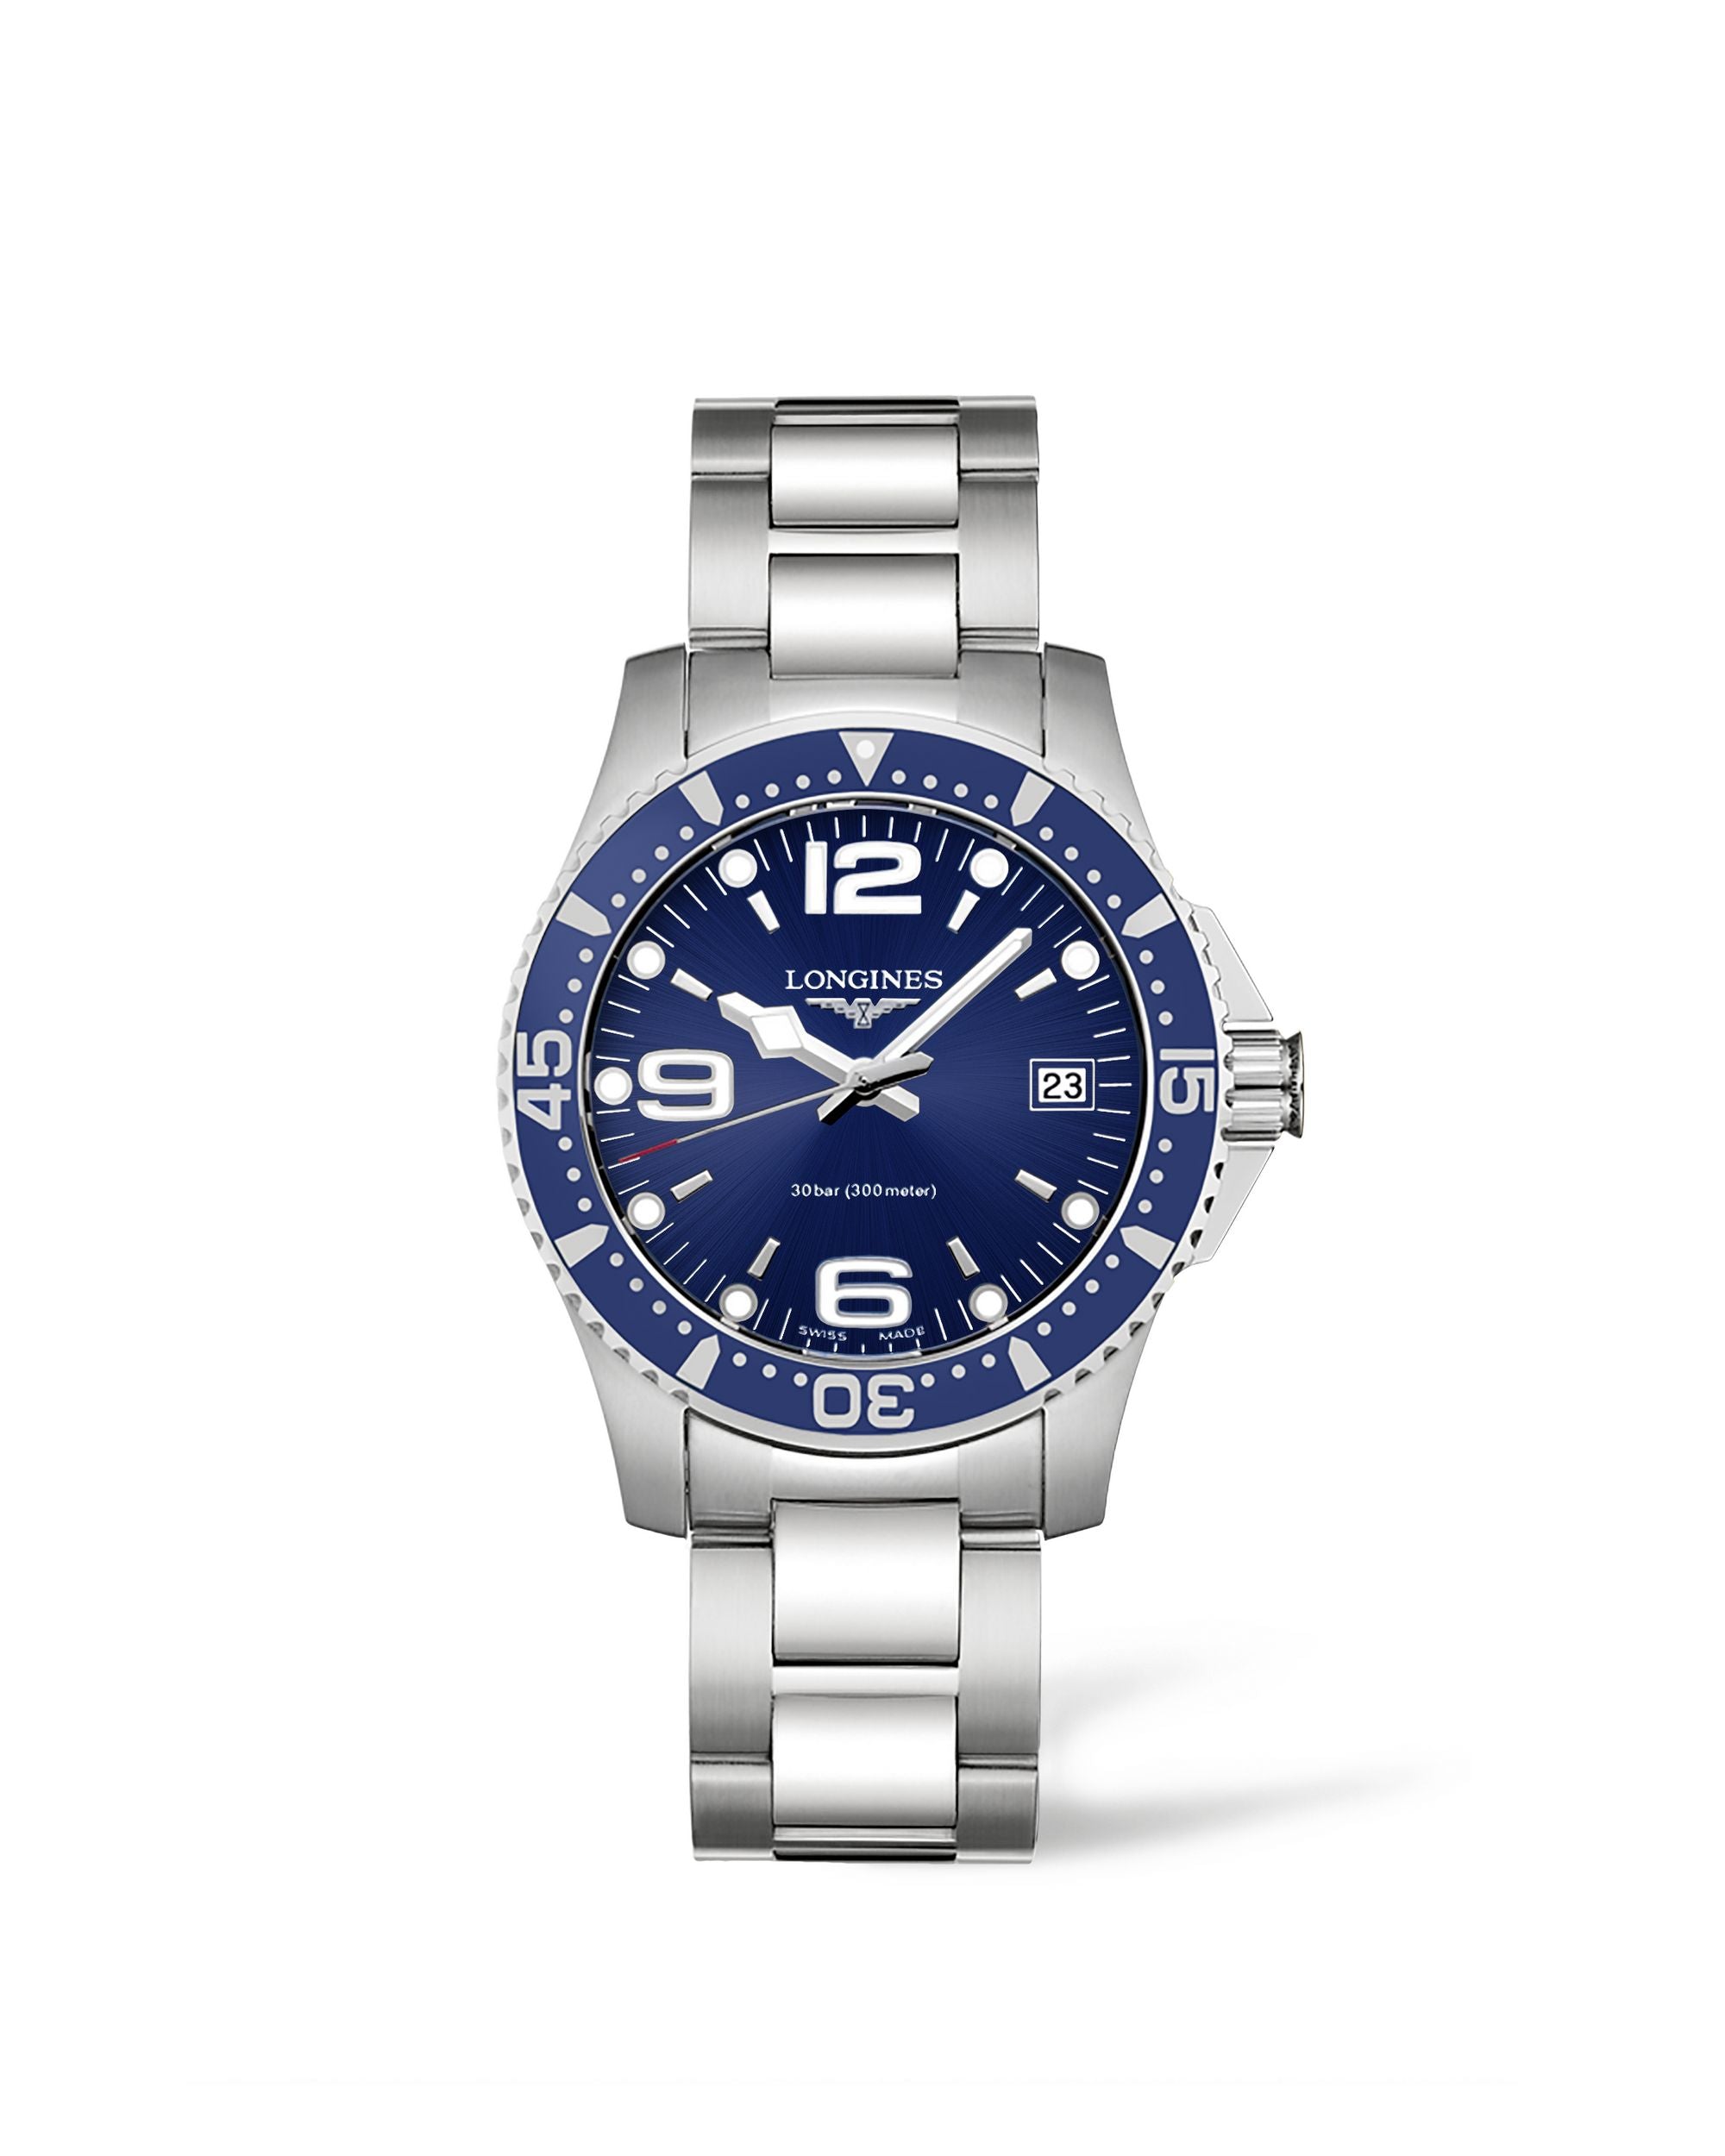 LONGINES HYDROCONQUEST COLLECTION